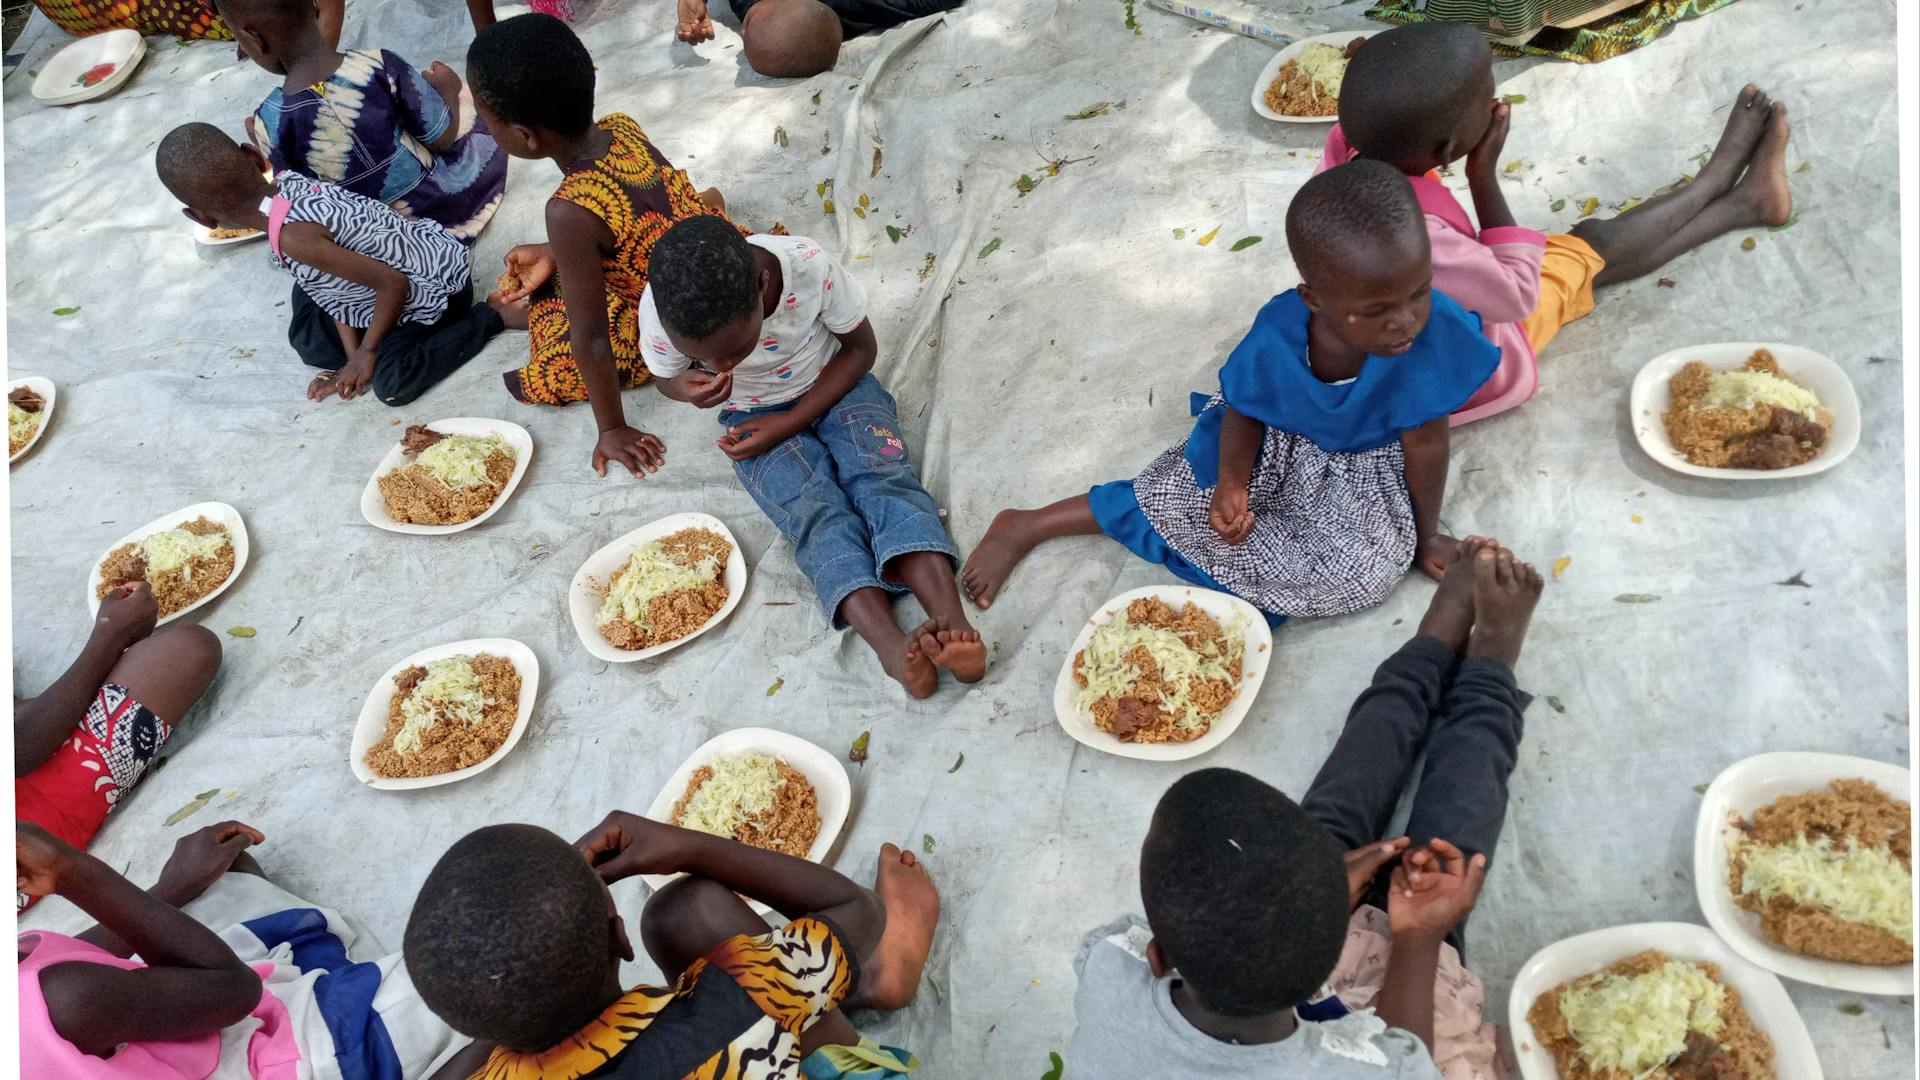 Having a meal donated by friends with the disadvantaged children at the ministry, Join the team and keep them smiling 